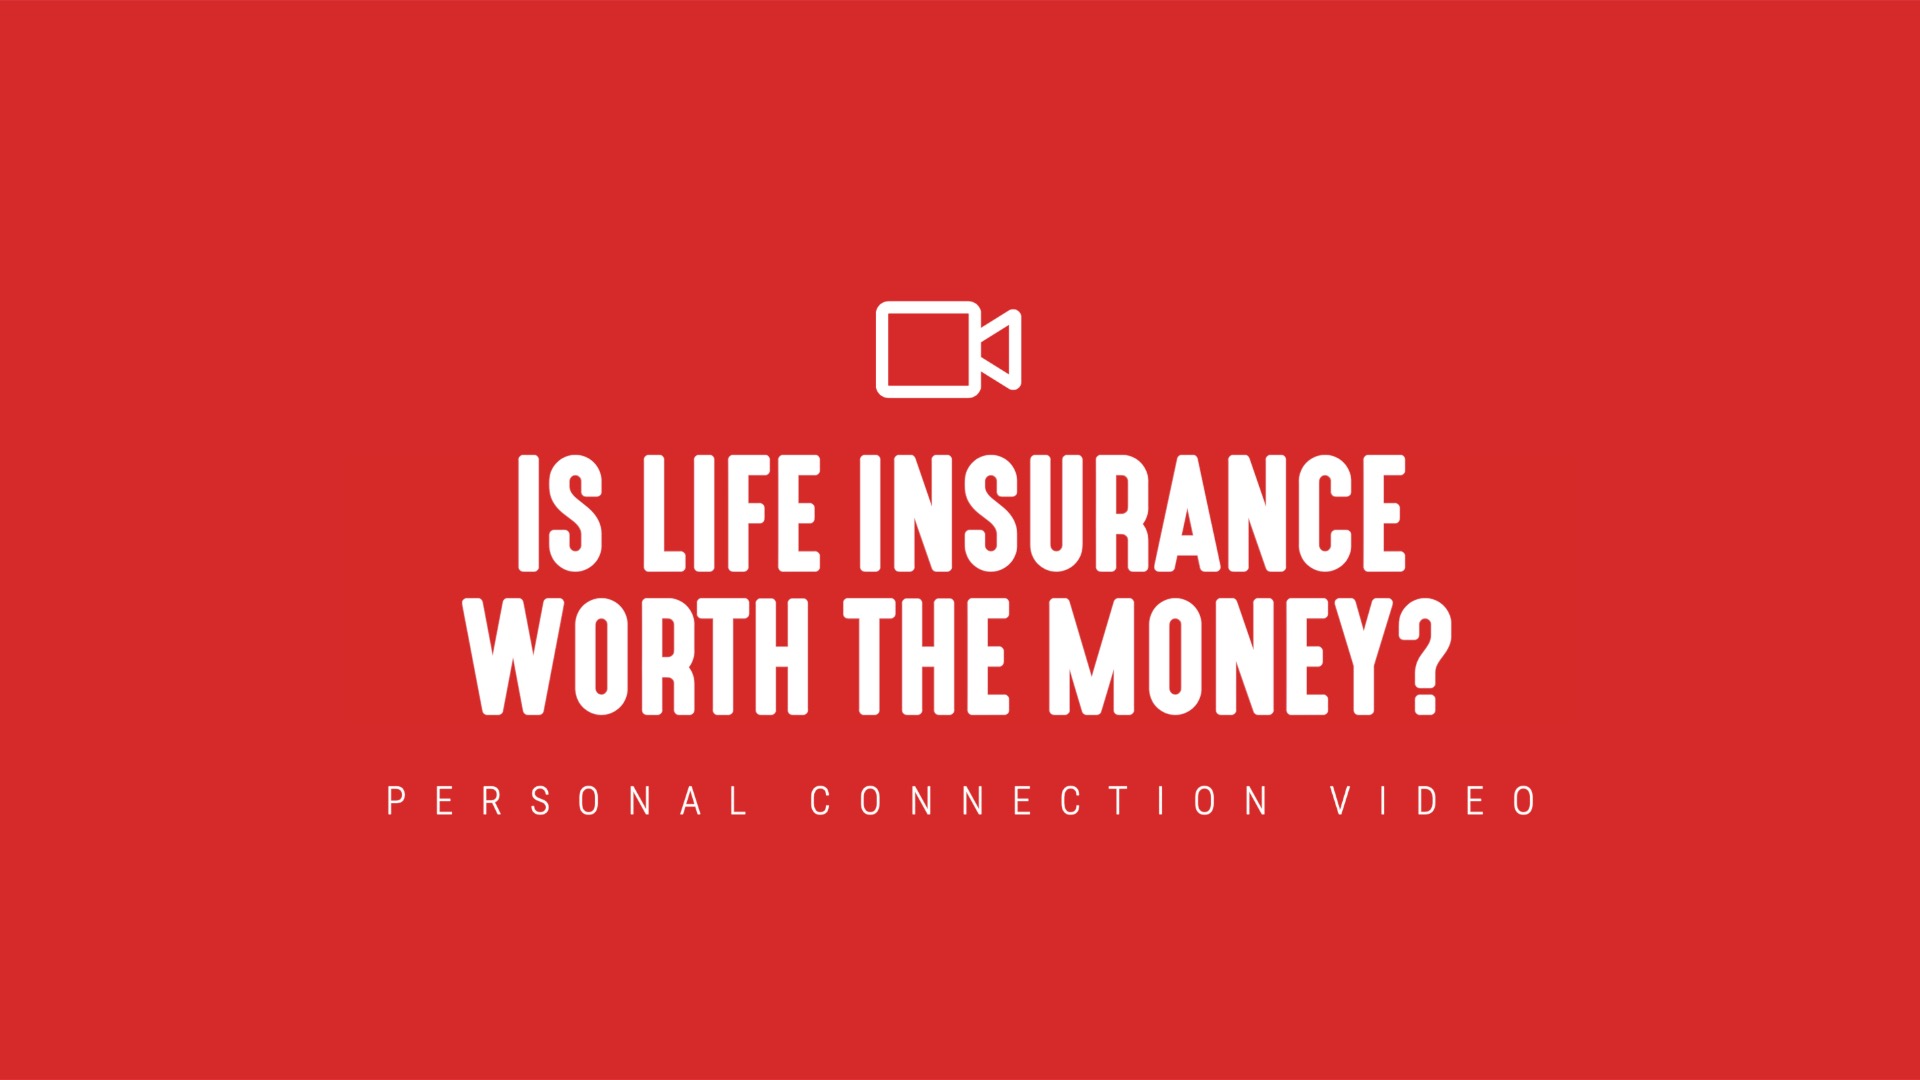 [NEW] Personal Connection Video | Is Life Insurance Worth the Money?